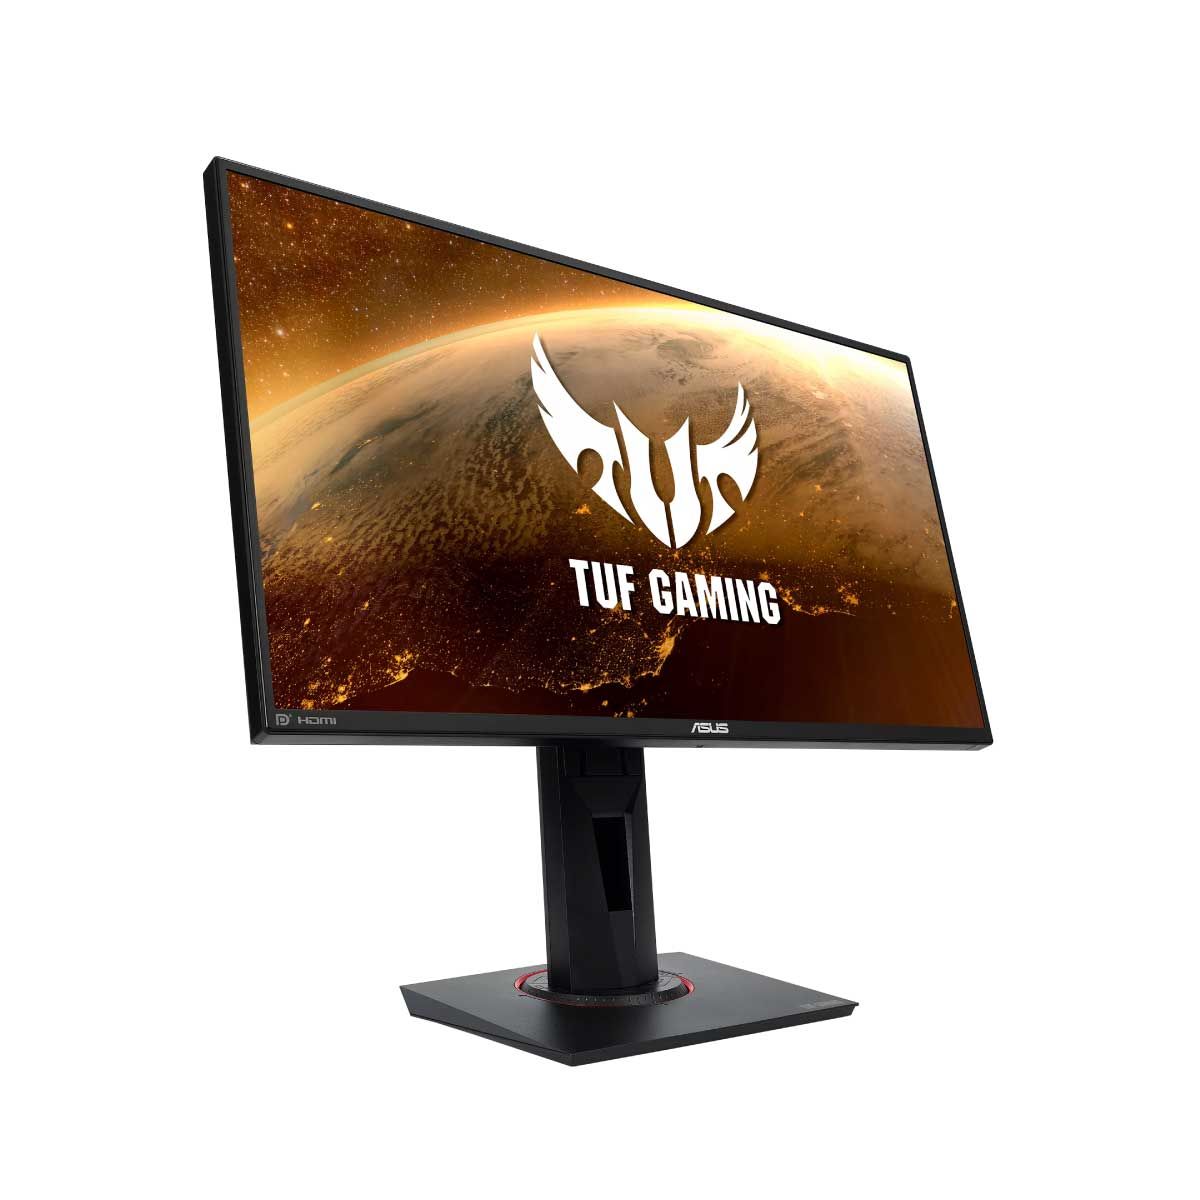 MONITOR (จอมอนิเตอร์) ASUS TUF GAMING VG259QR - 24.5" IPS FHD 165Hz G-SYNC COMPATIBLE